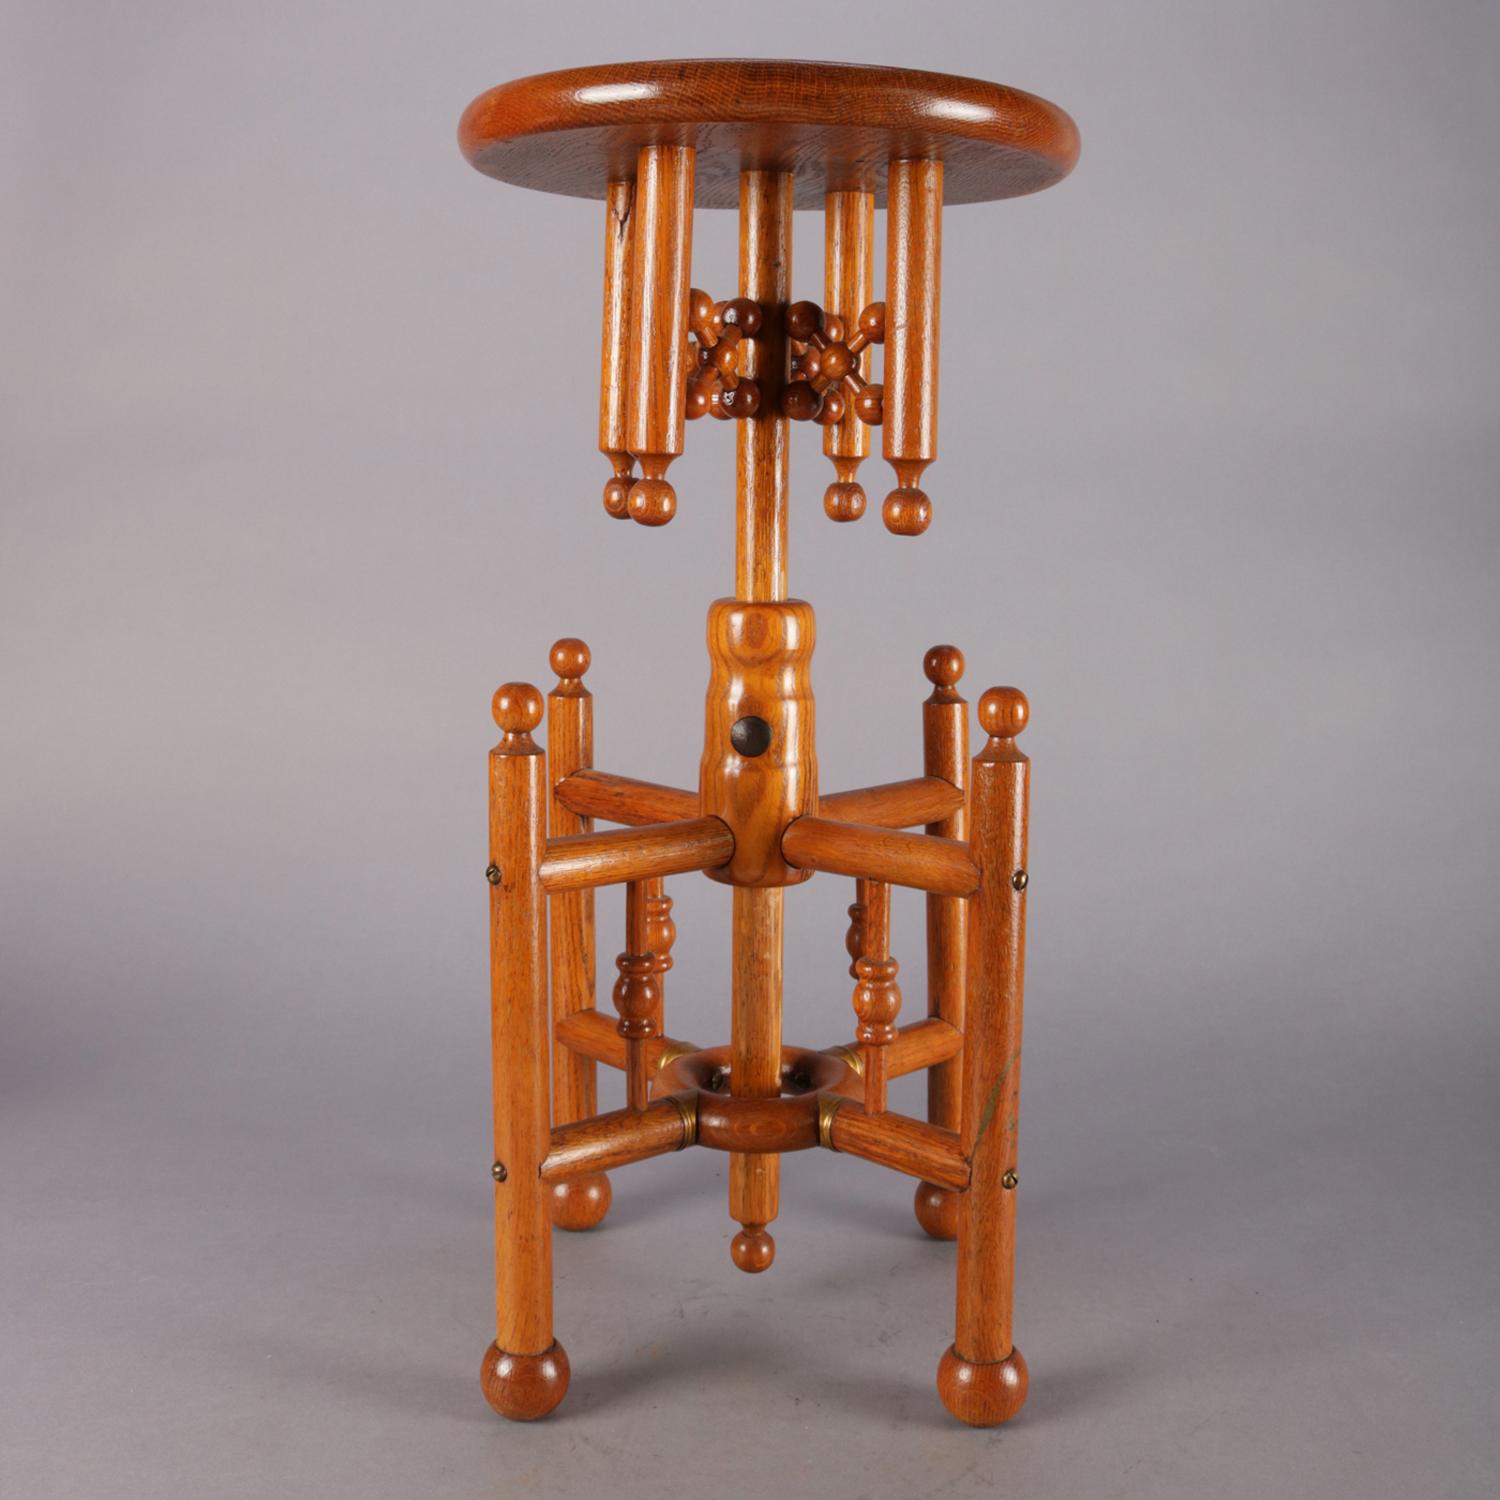 Antique piano stool features oak construction with stick and ball form and adjustable seat, circa 1880.

Measures: 27